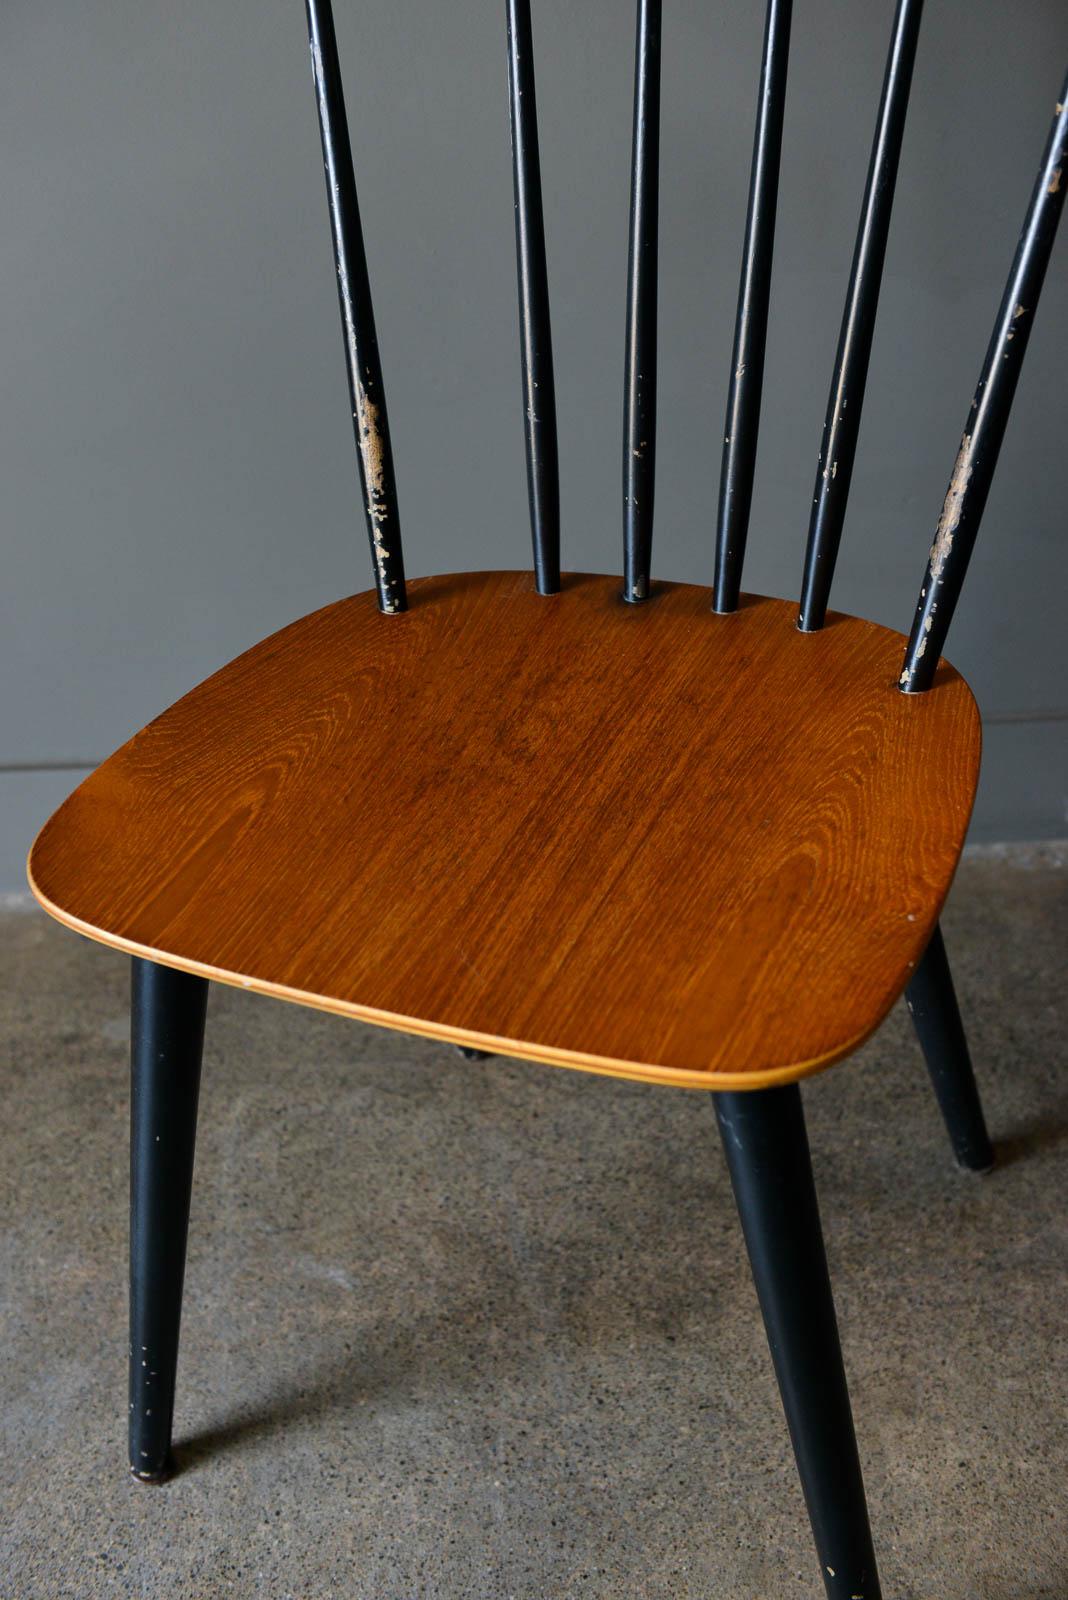 Scandinavian Modern Danish Spindle Back Chair by Thomas Harlev for Farstrup, 1960 For Sale